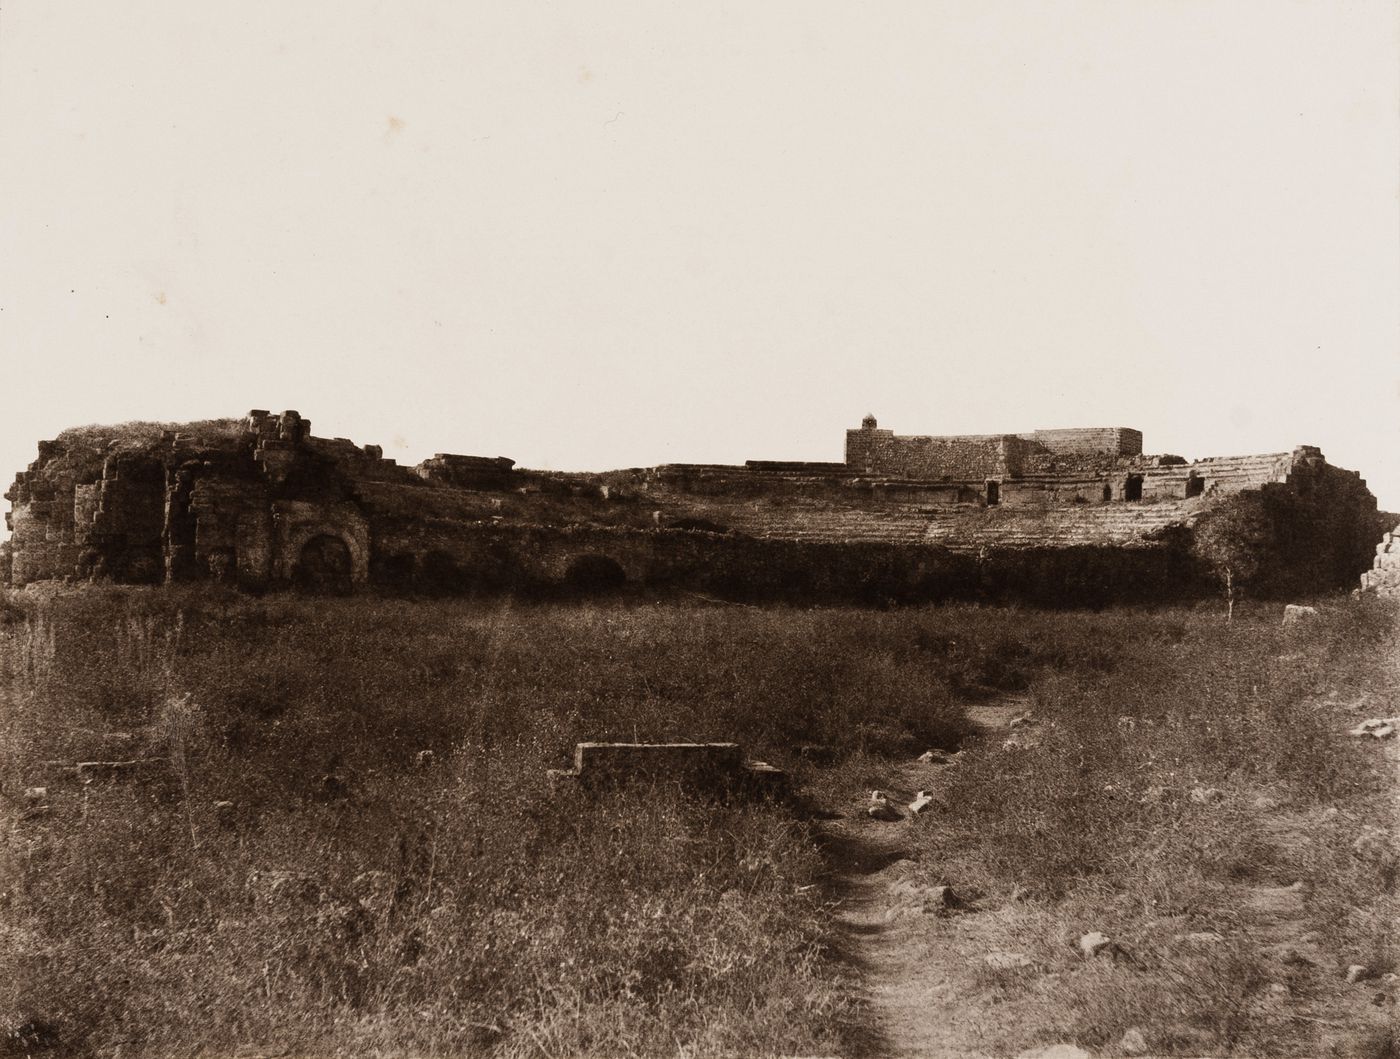 View of the ruins of a Roman amphitheater showing tiers of seats, Jebel ed Druz, Ottoman Empire (now in Syria)